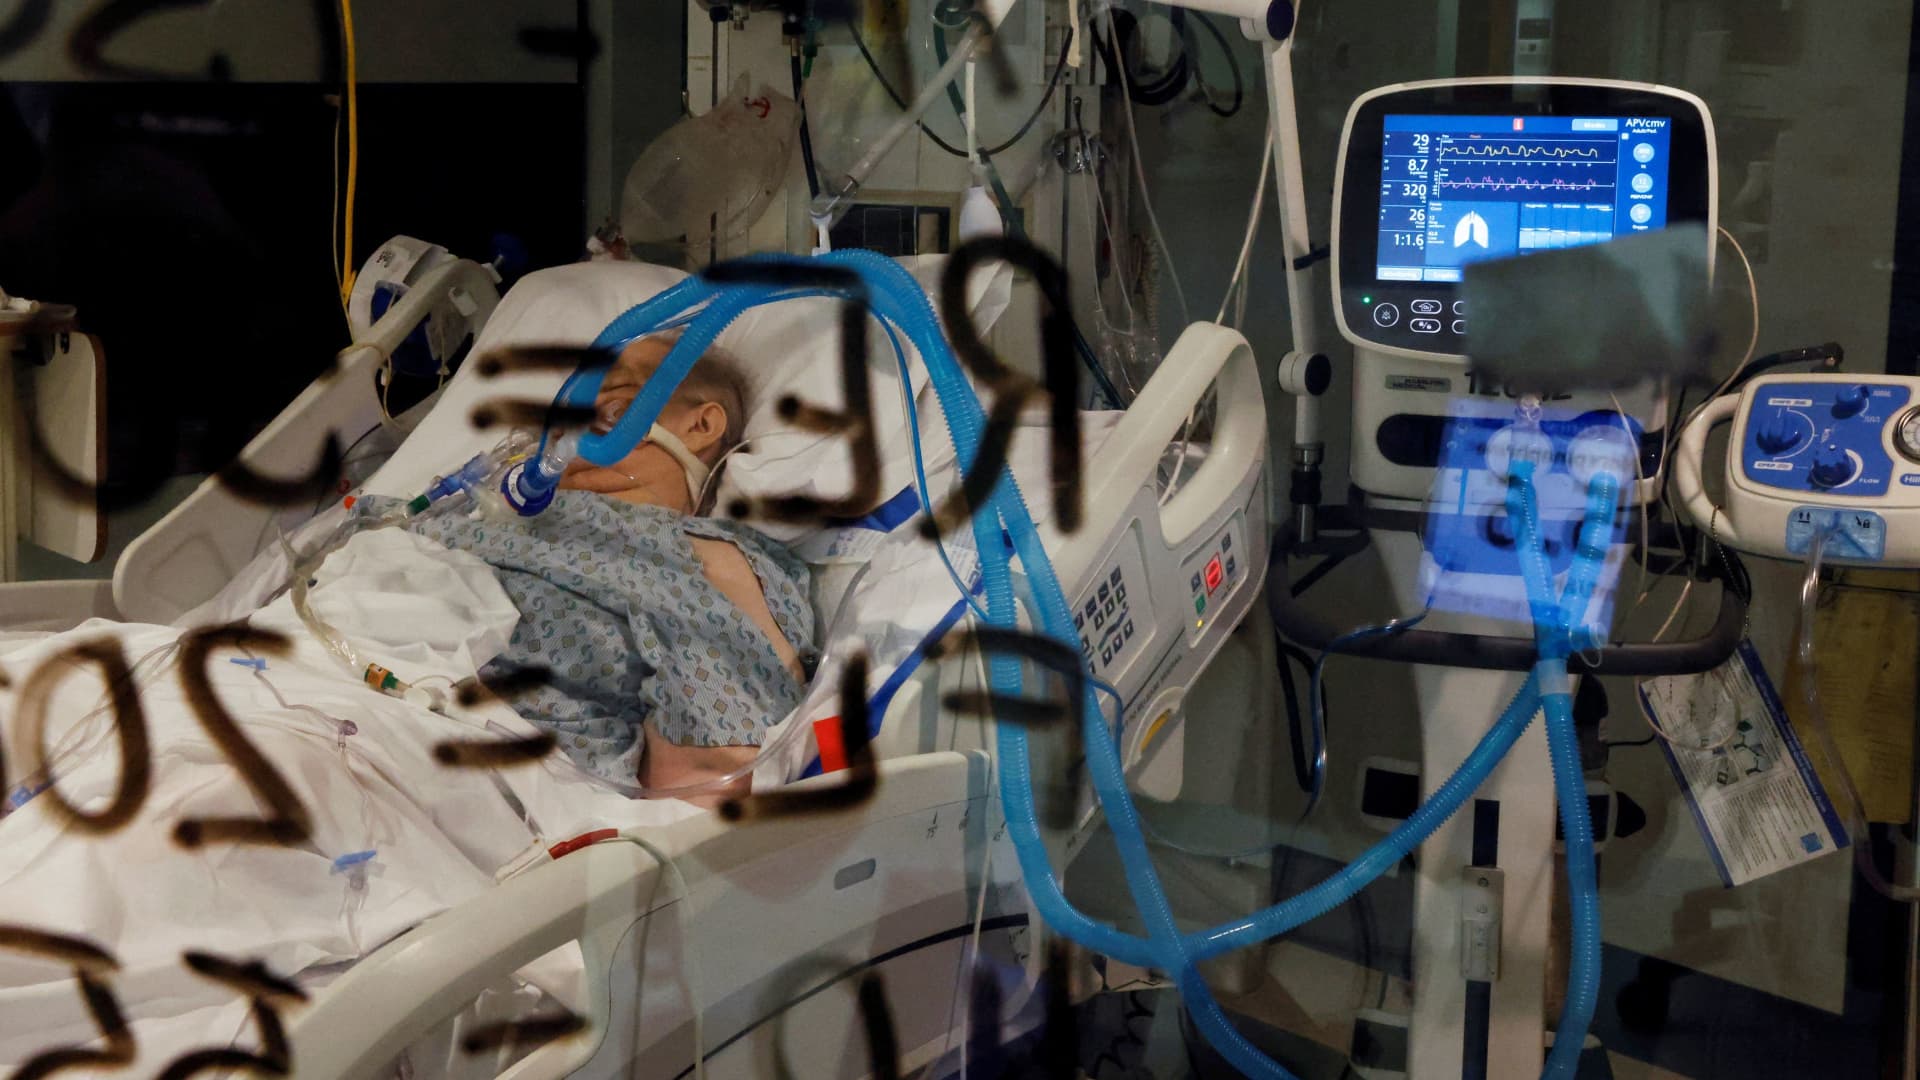 A coronavirus disease (COVID-19) patient lies intubated in their isolation room on the Intensive Care Unit (ICU) at Western Reserve Hospital in Cuyahoga Falls, Ohio, U.S., January 4, 2022.